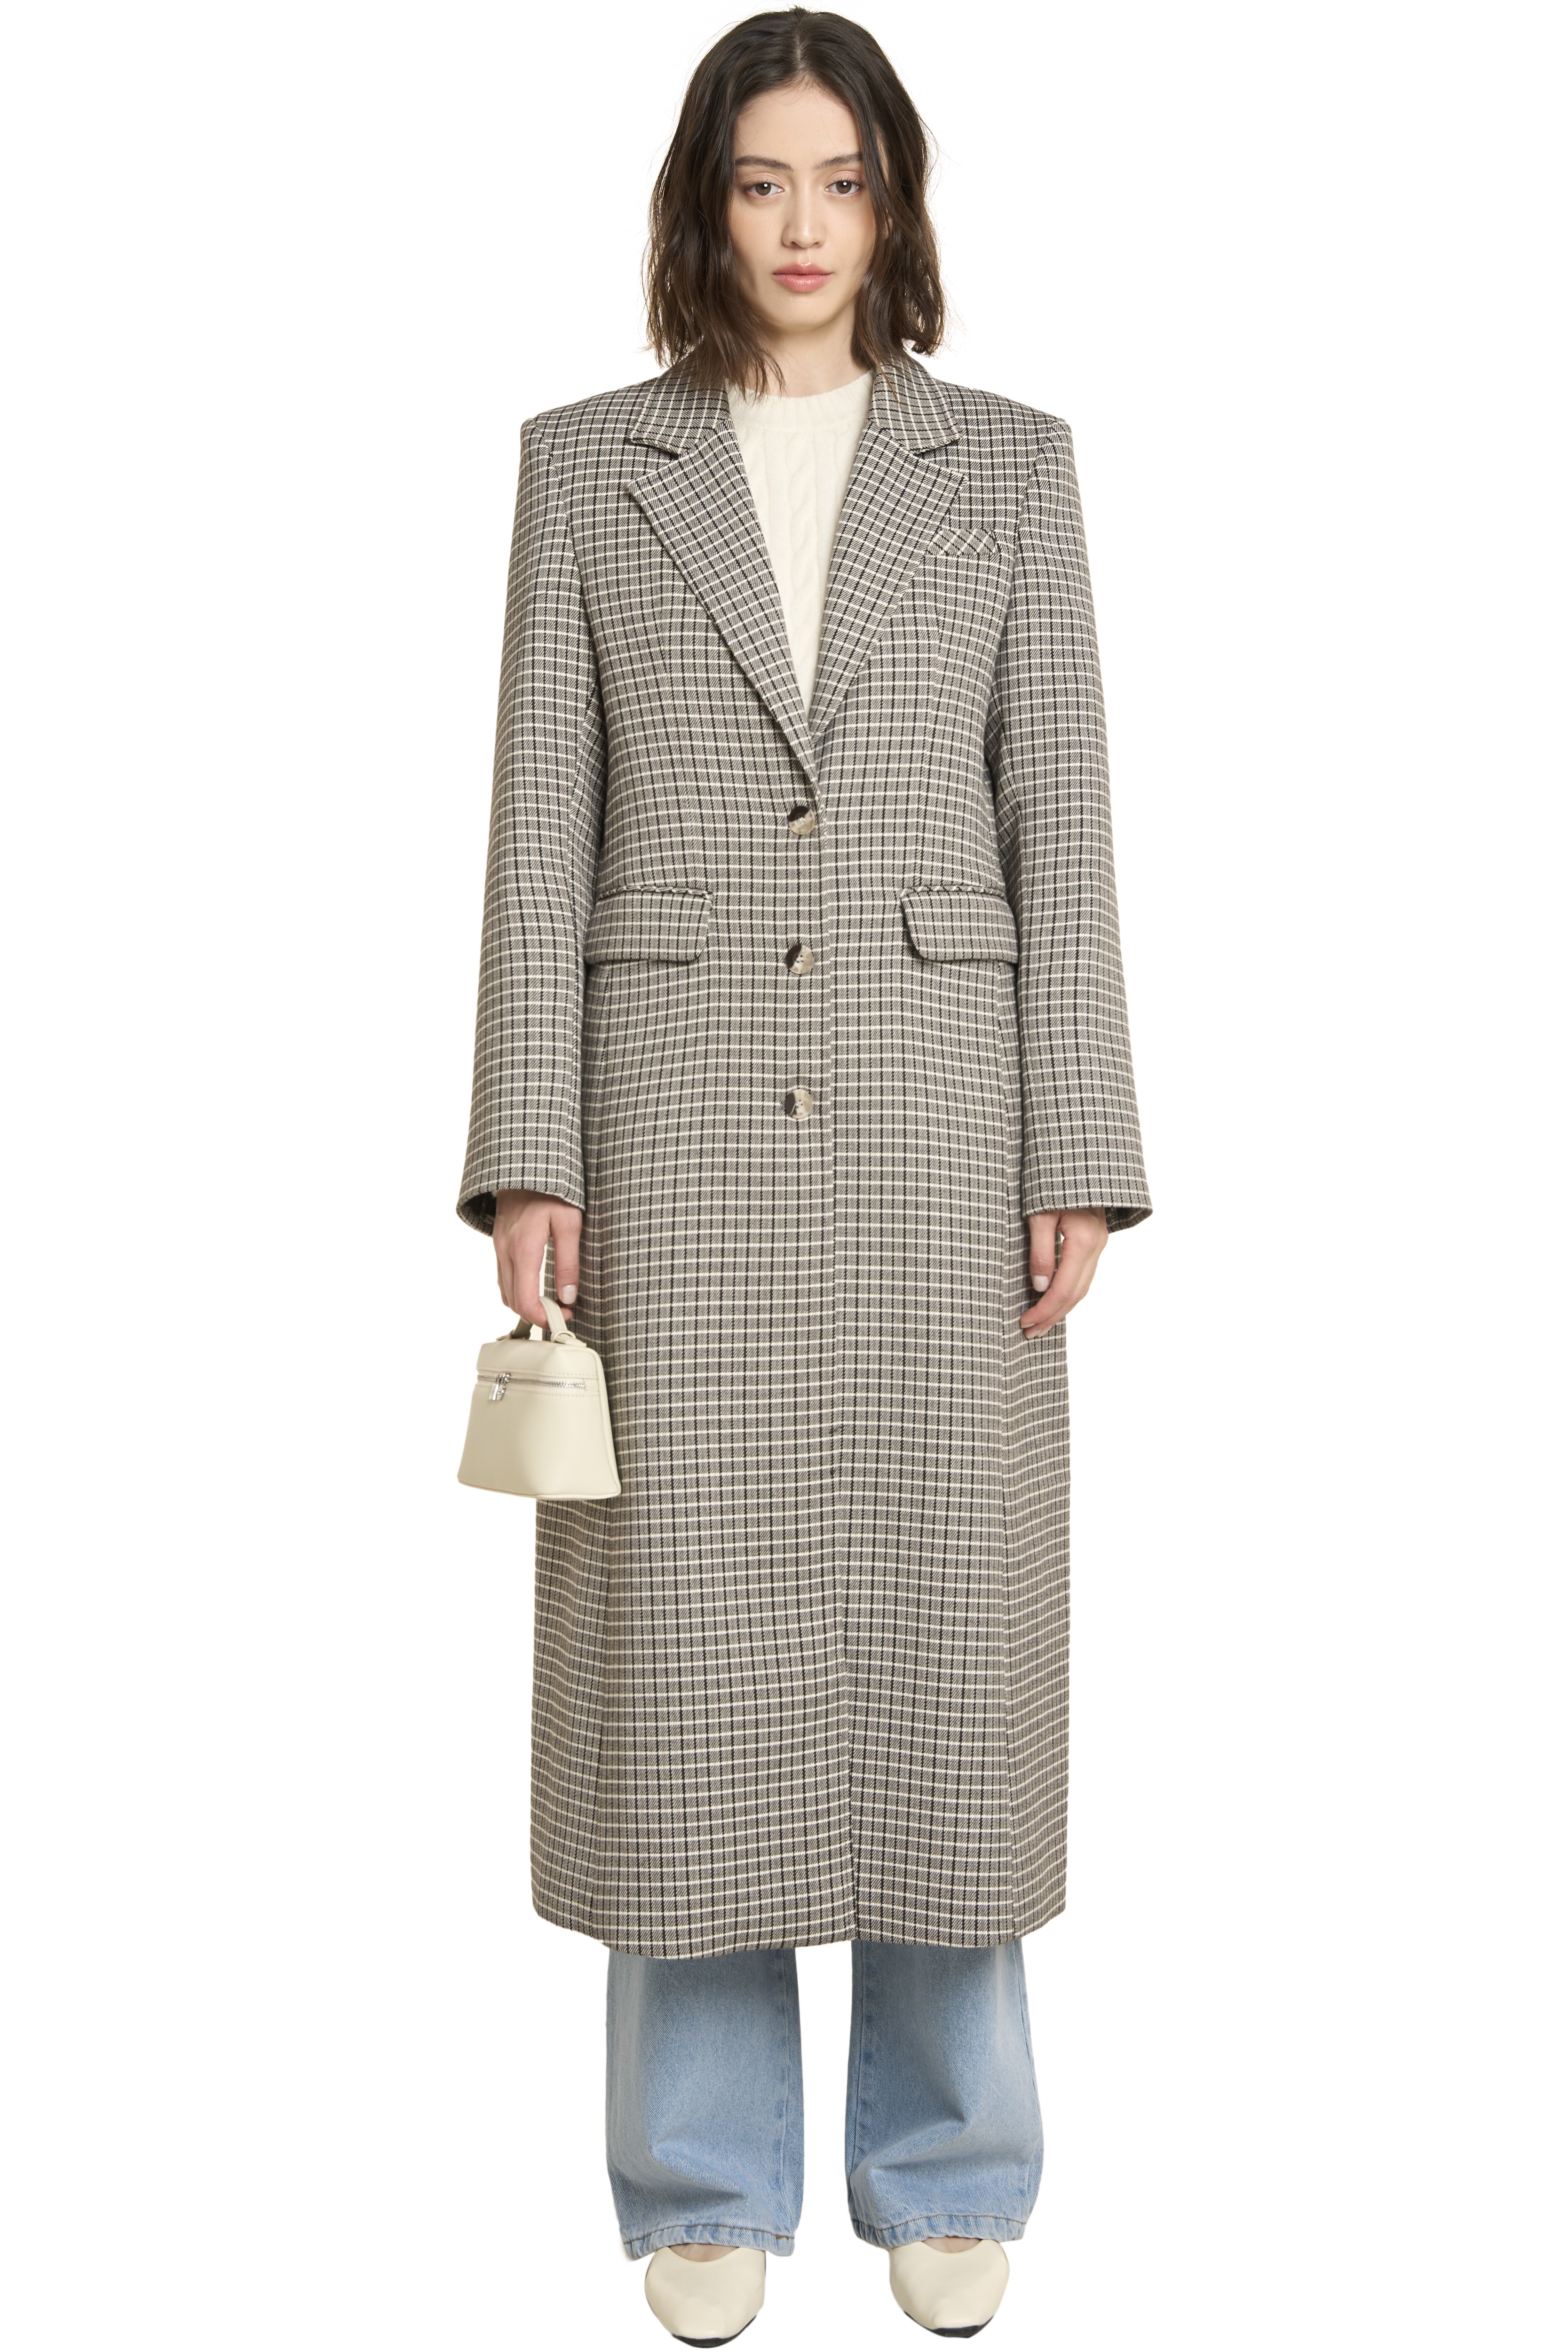 CLERY COAT - BLACK AND OFF WHITE PLAID